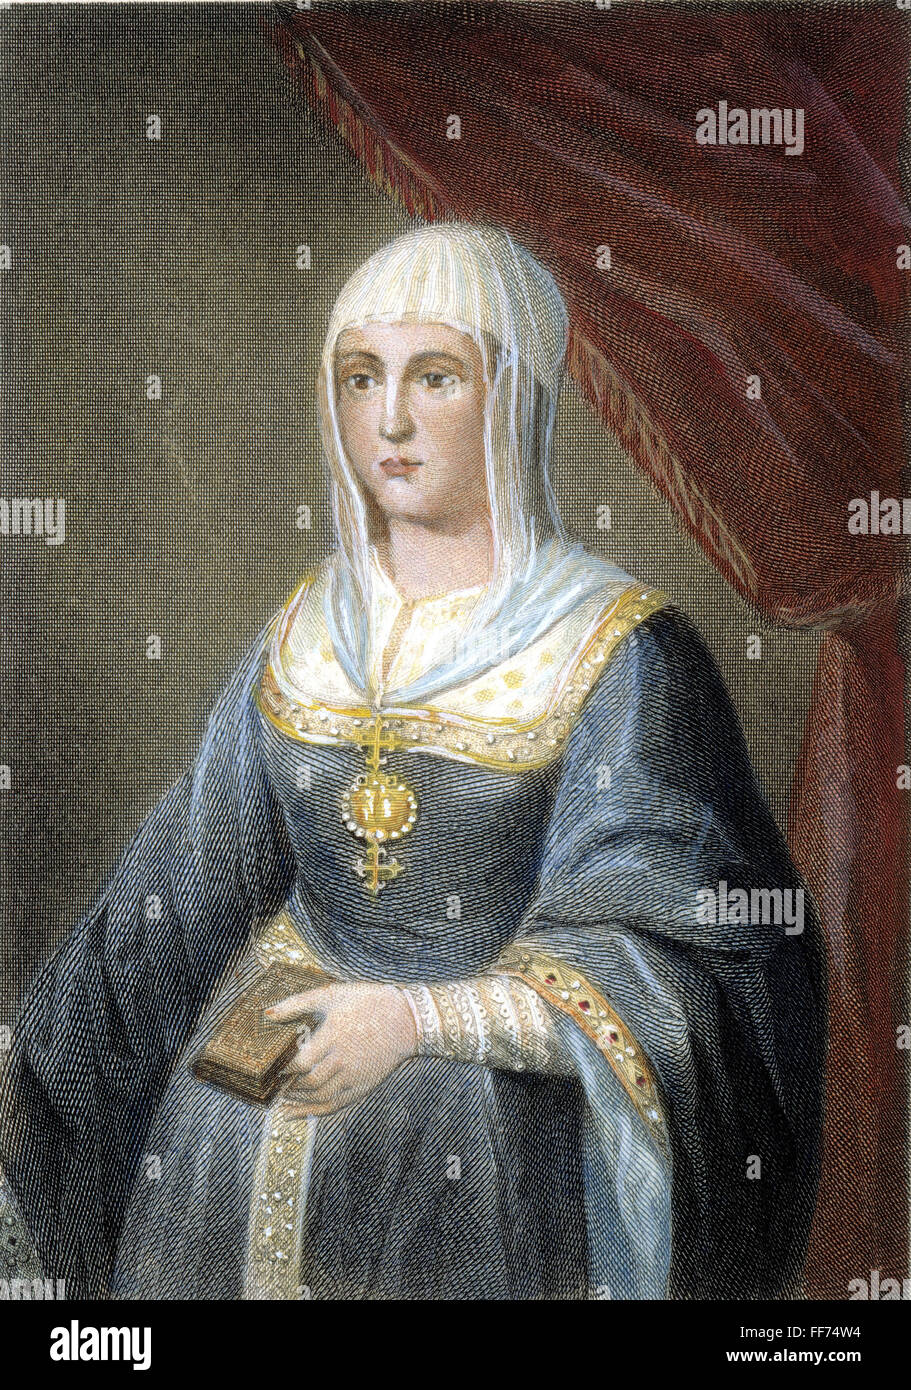 QUEEN ISABELLA I /nof Castile and Aragon (1451-1504): steel engraving, English, 1838. Stock Photo